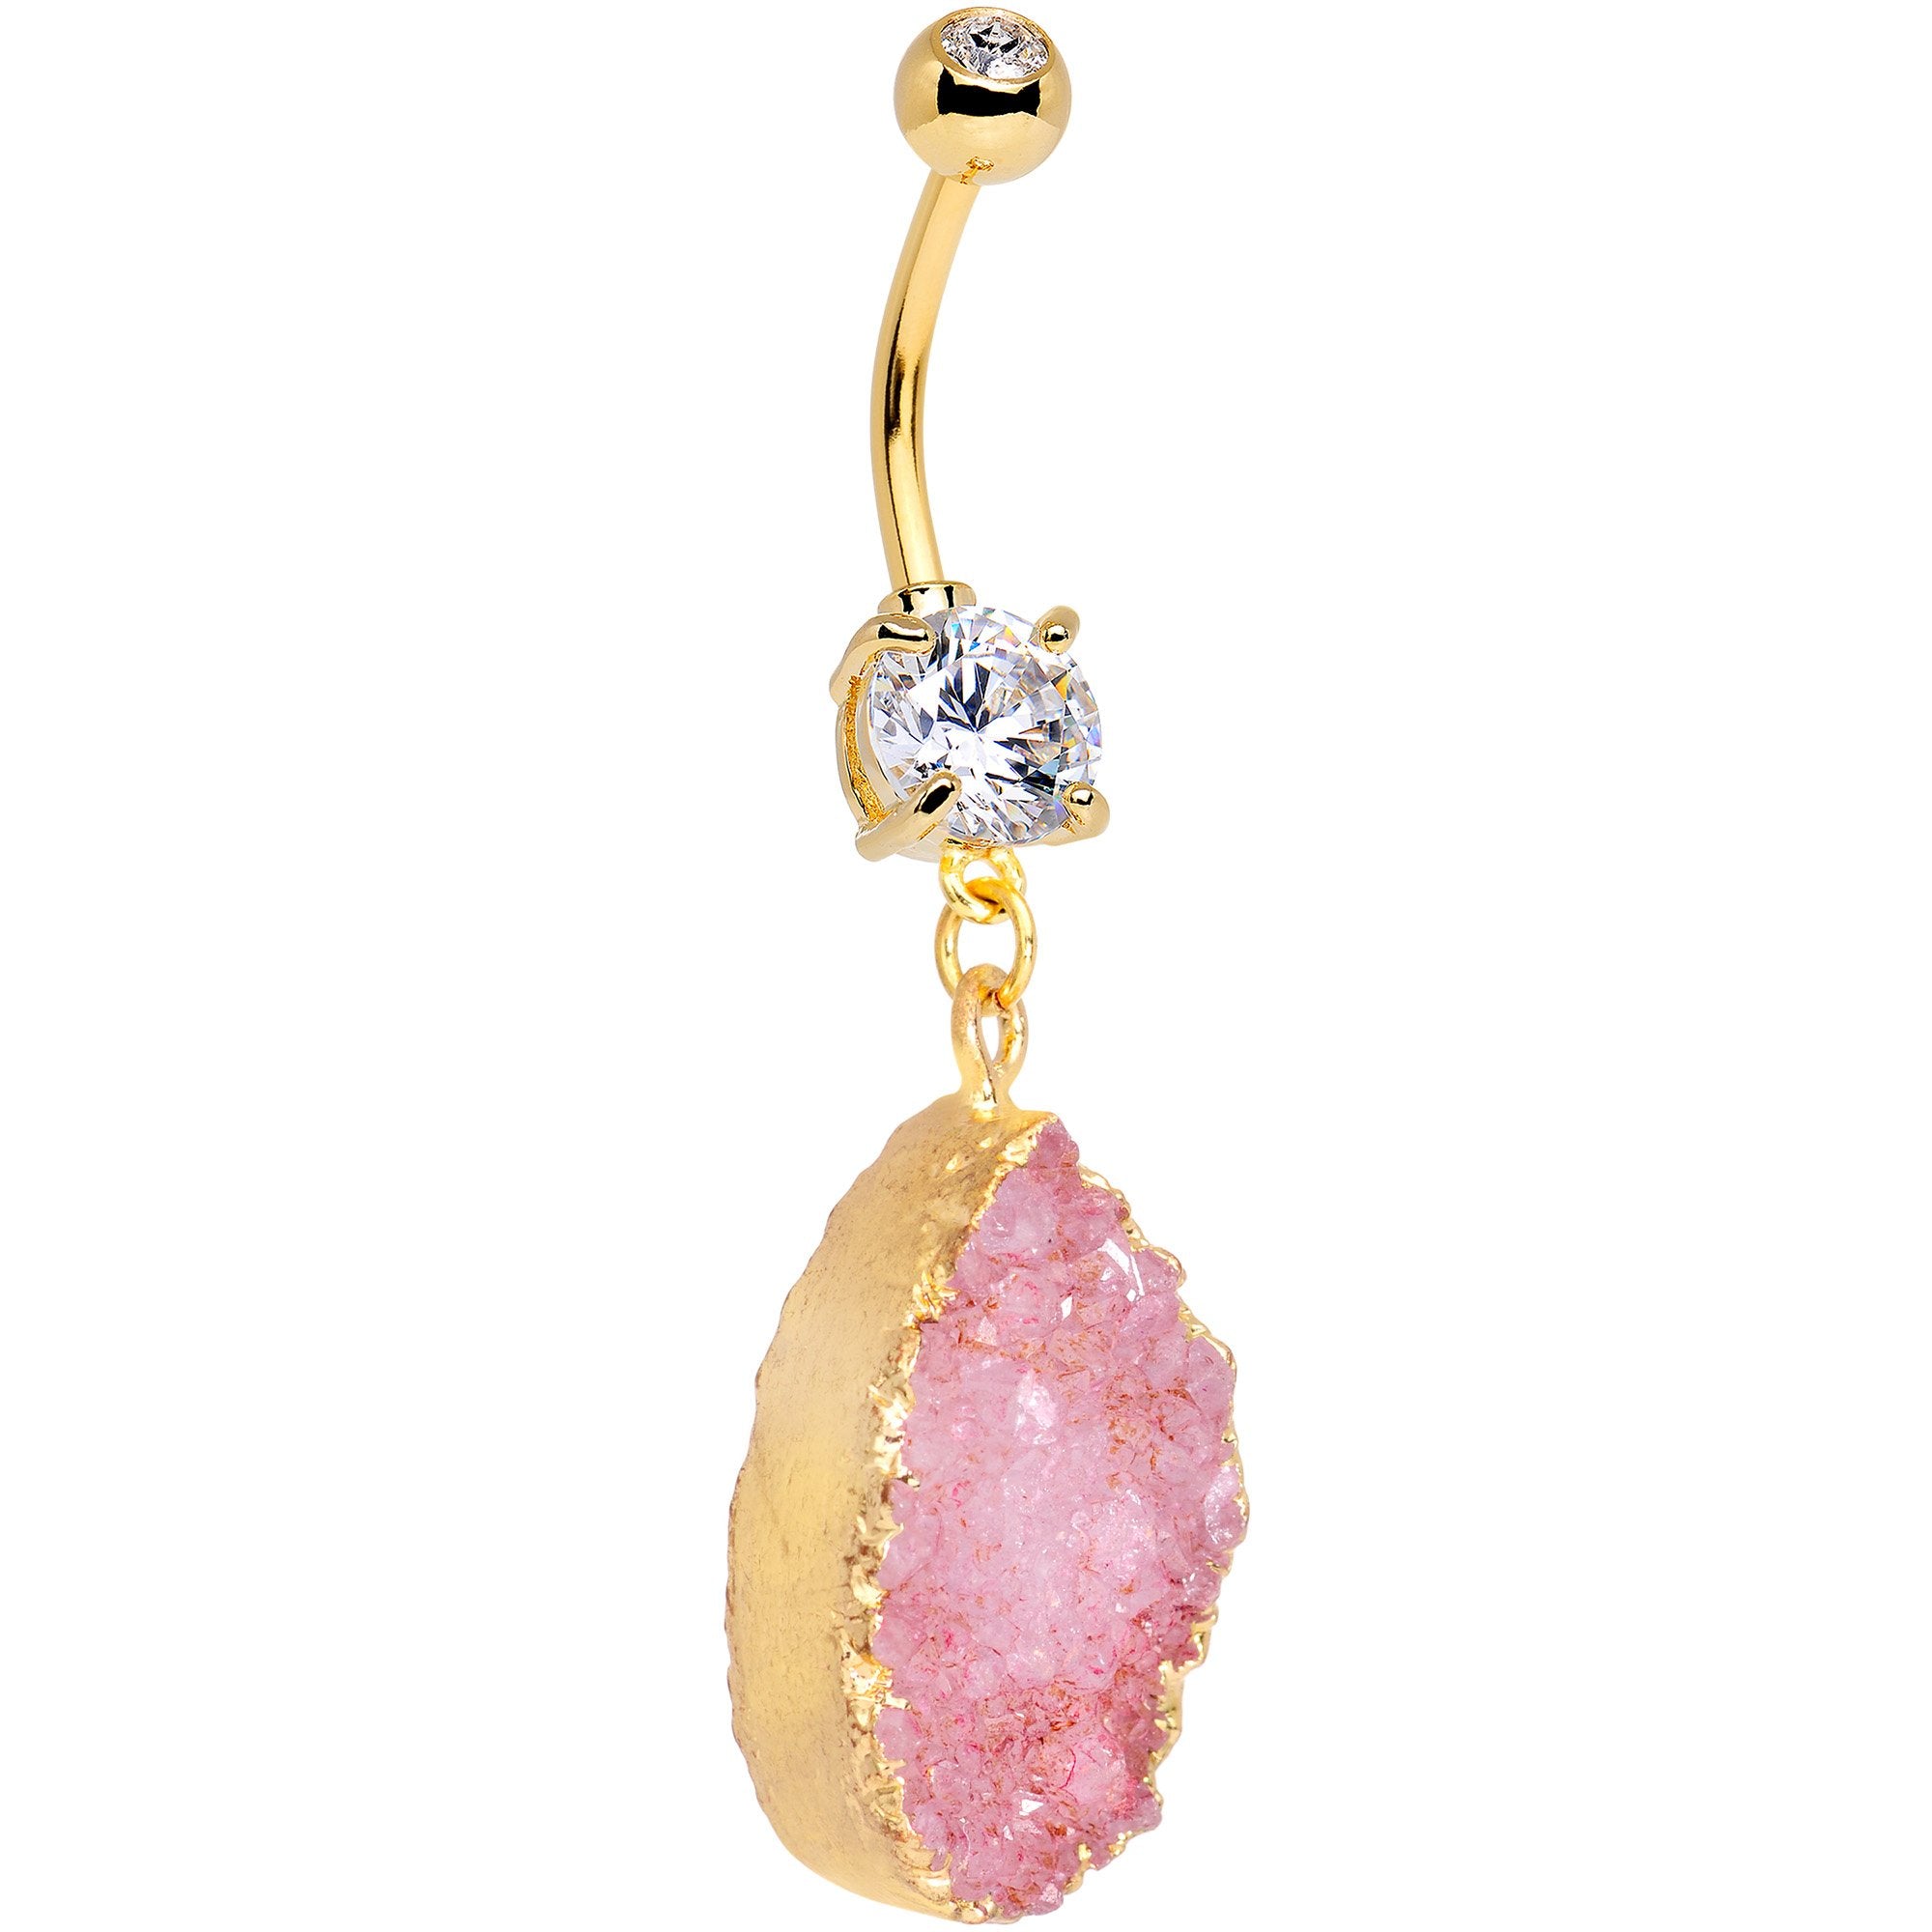 Handmade Pink Agate Dangle Belly Ring Created with Crystals